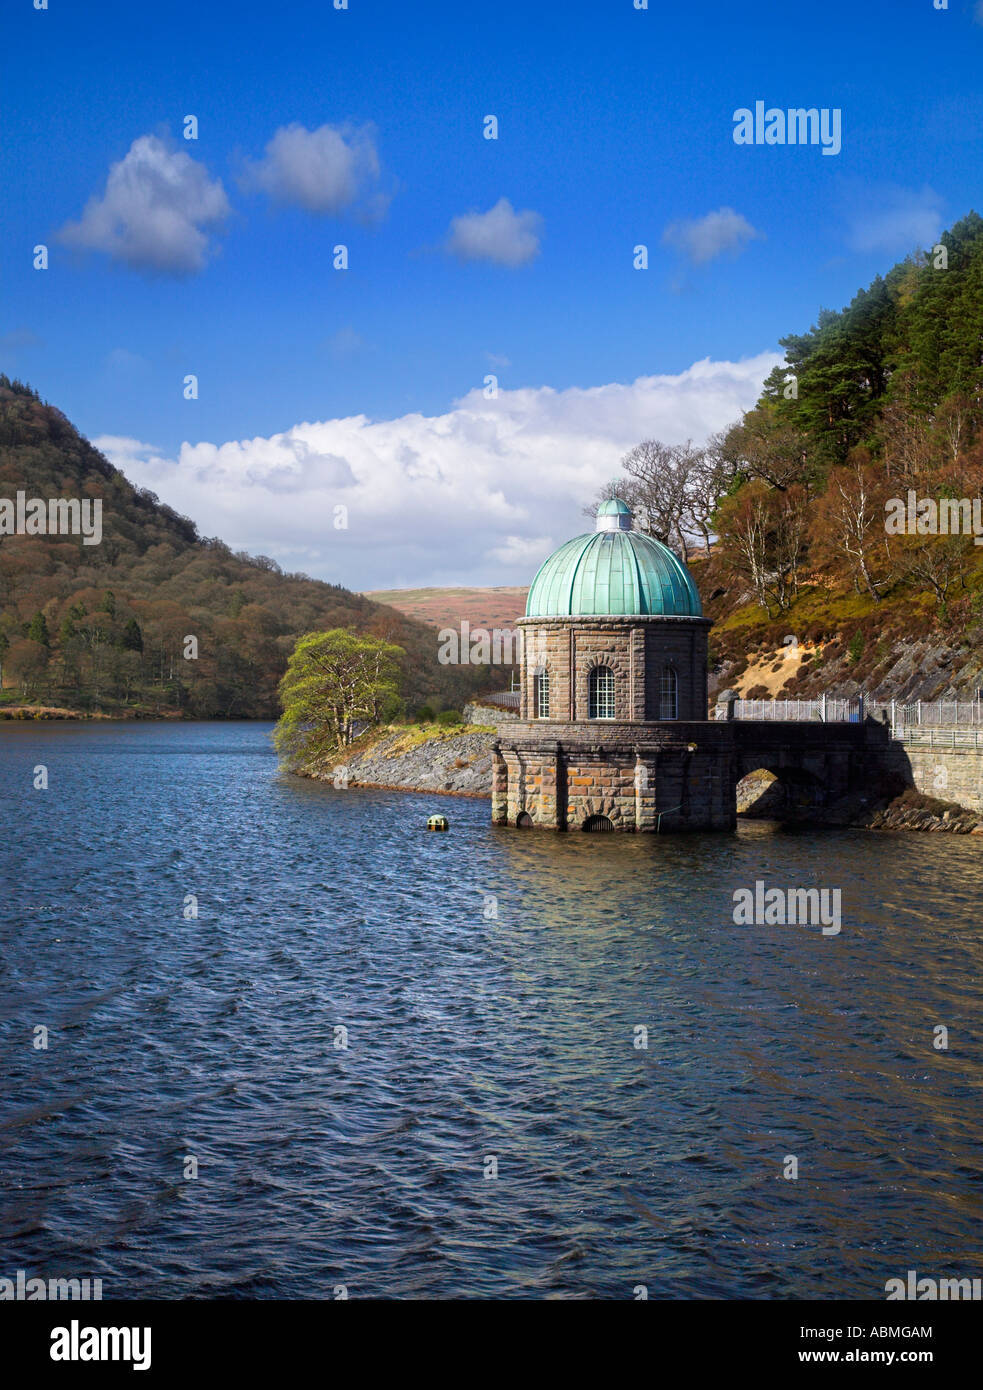 Vertical colour picture of the control tower on Garreg Ddu reservoir, Powys, Wales Stock Photo